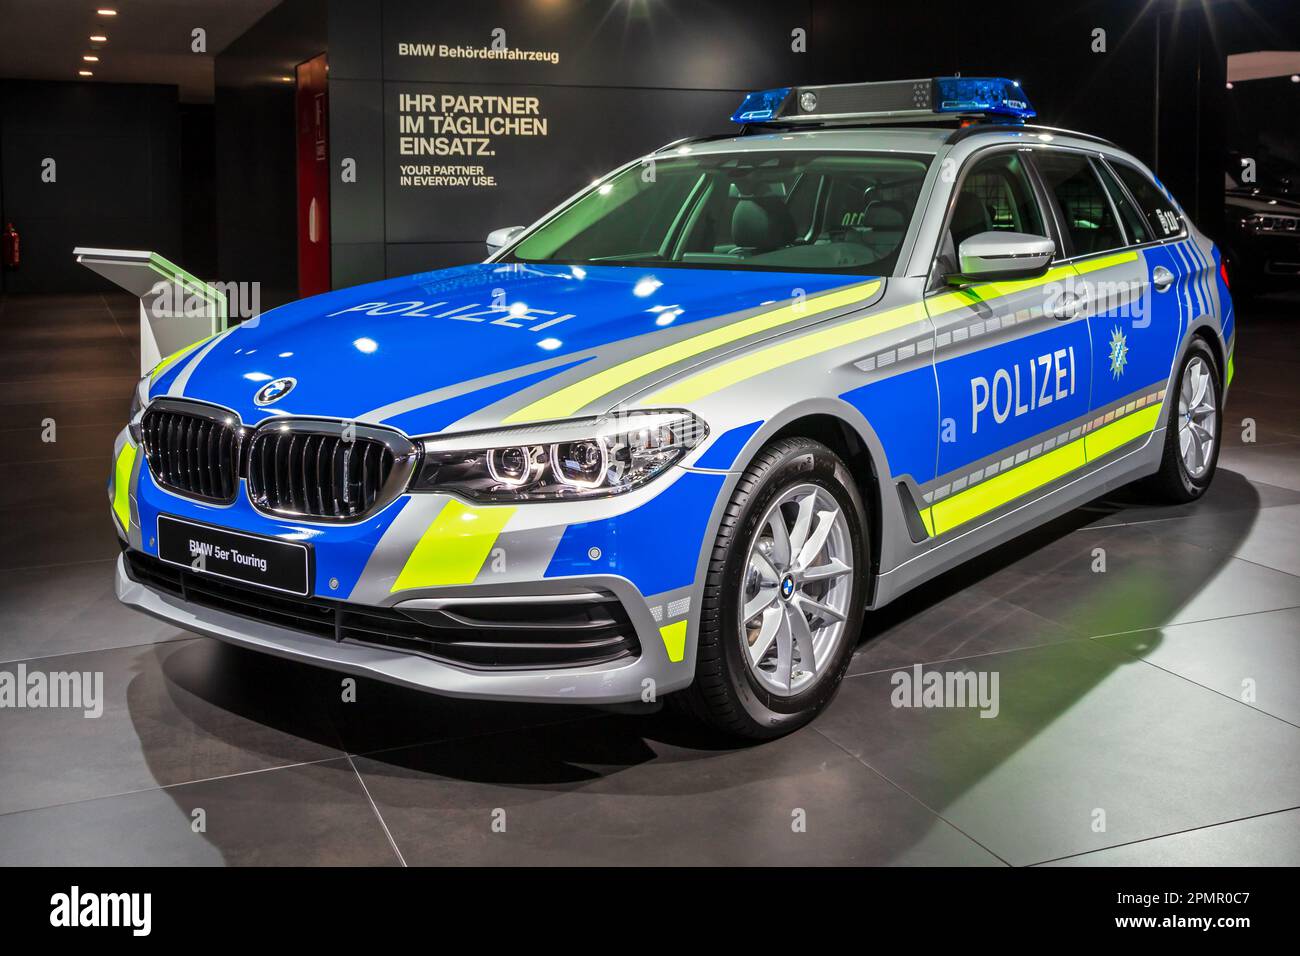 BMW 5e Touring of the German Police car at the Frankfurt IAA Motor Show. Germany - September 12, 2017. Stock Photo